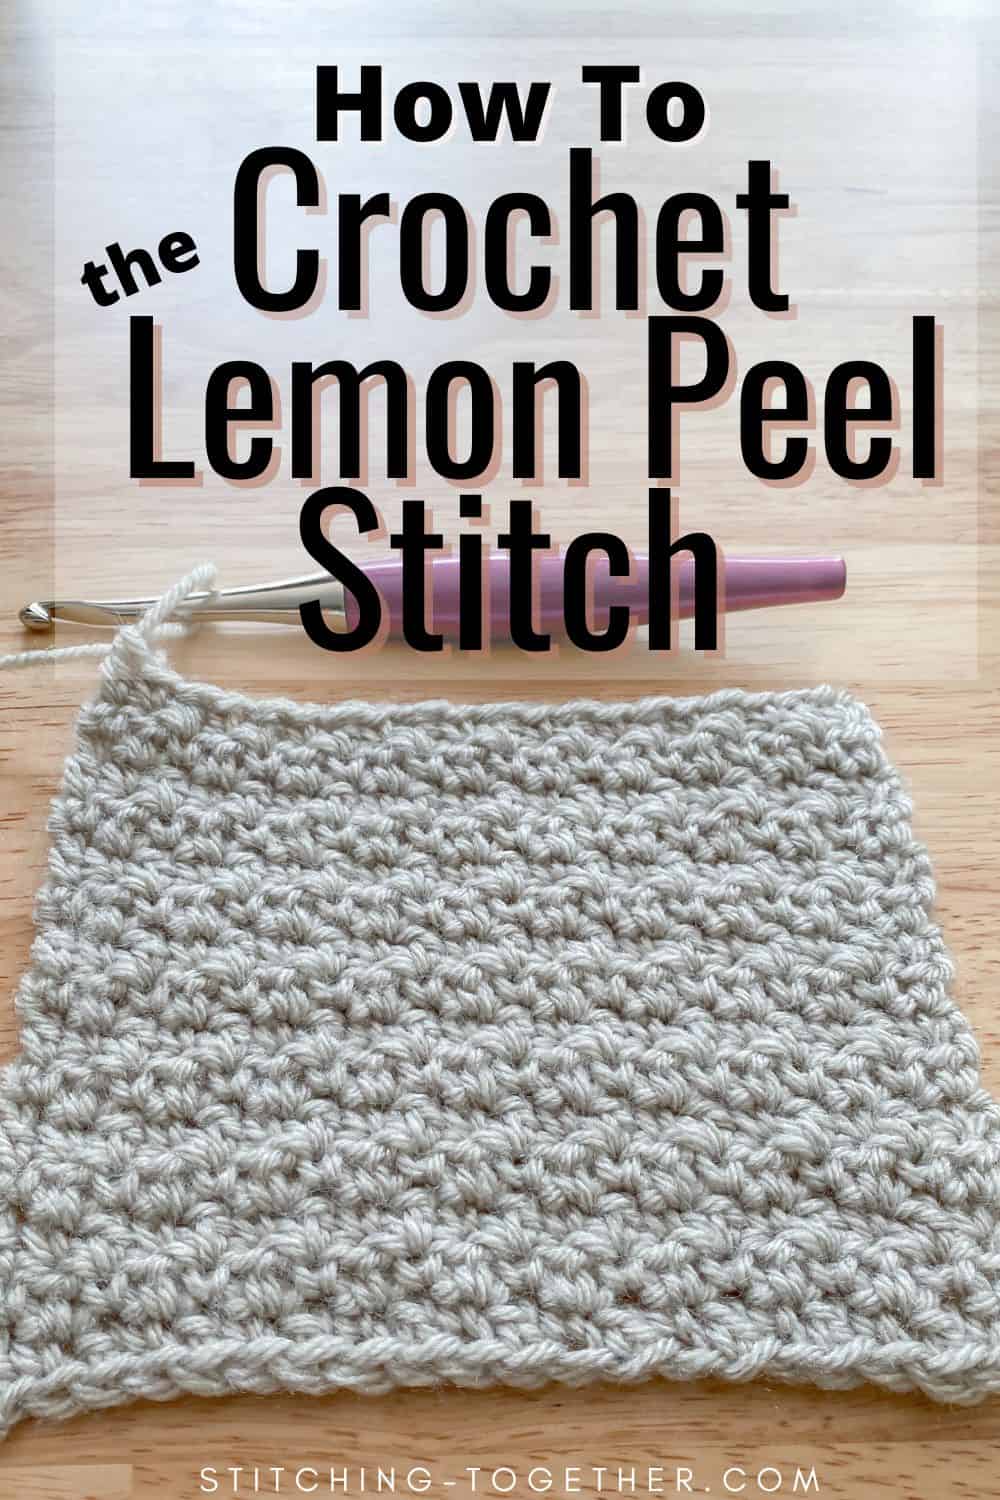 graphic reading "how to crochet the lemon peel stitch" with a crochet swatch of fabric and a hook in the background